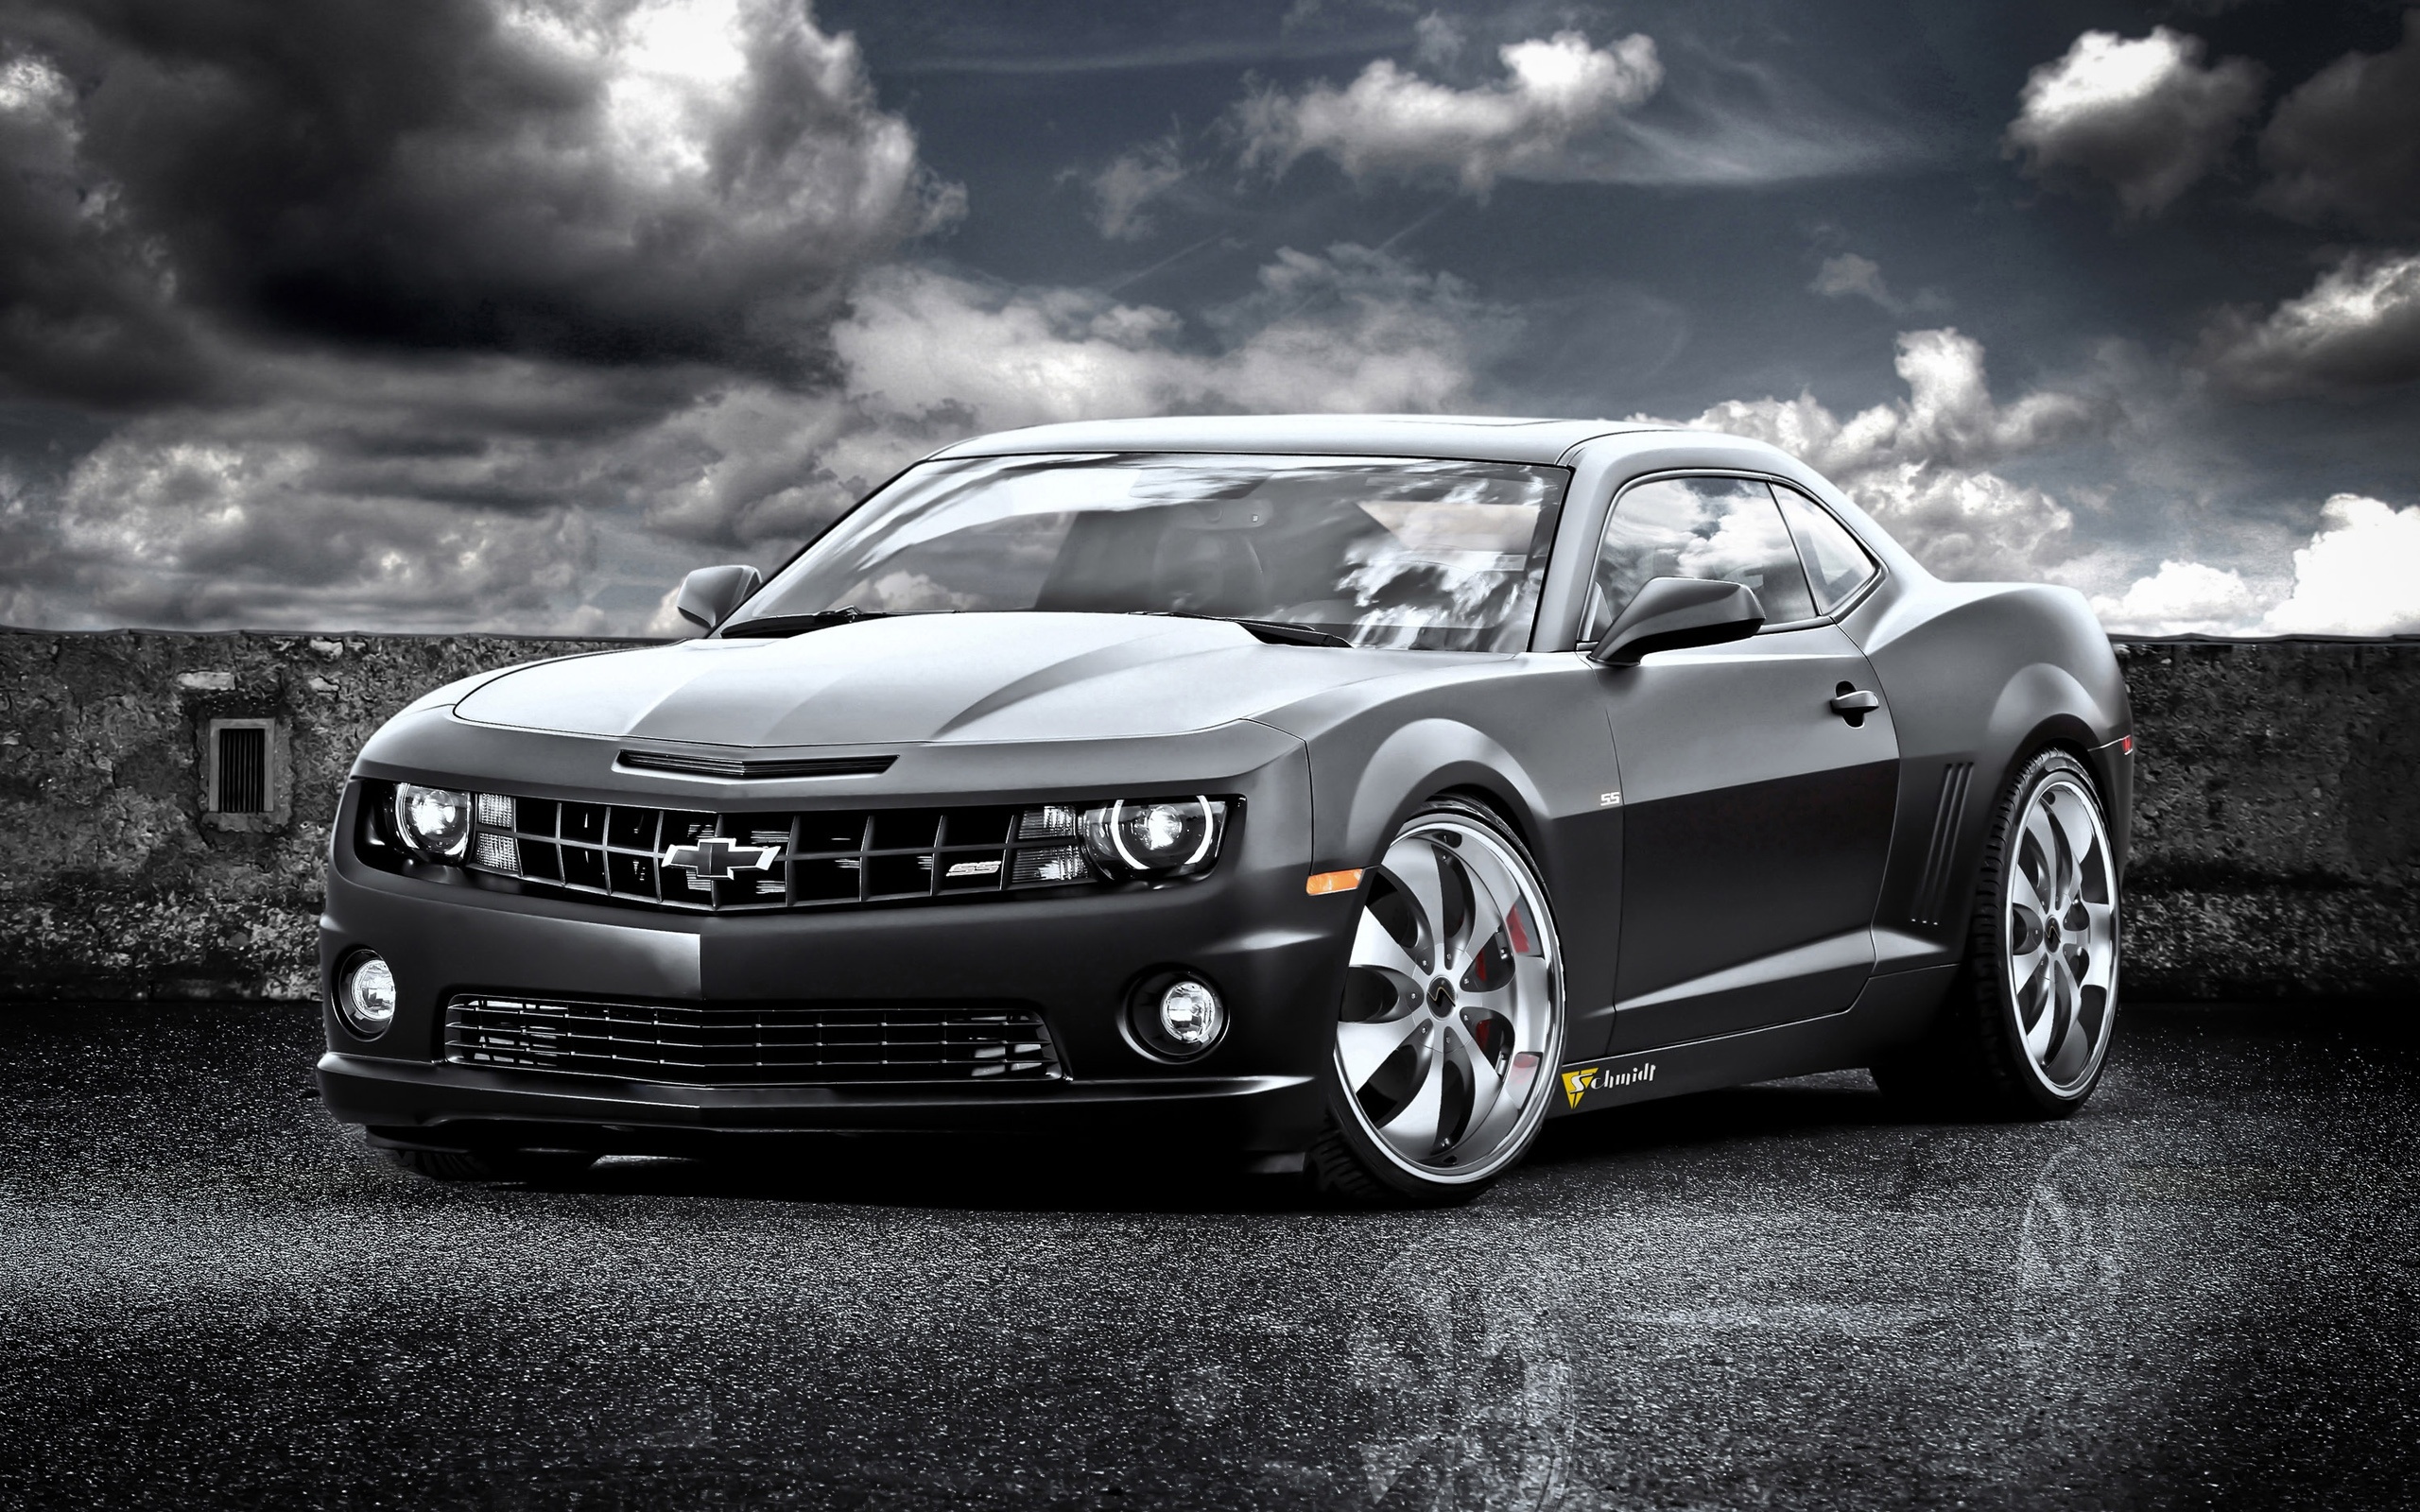 Chevrolet Camaro SS Wallpapers HD Wallpapers